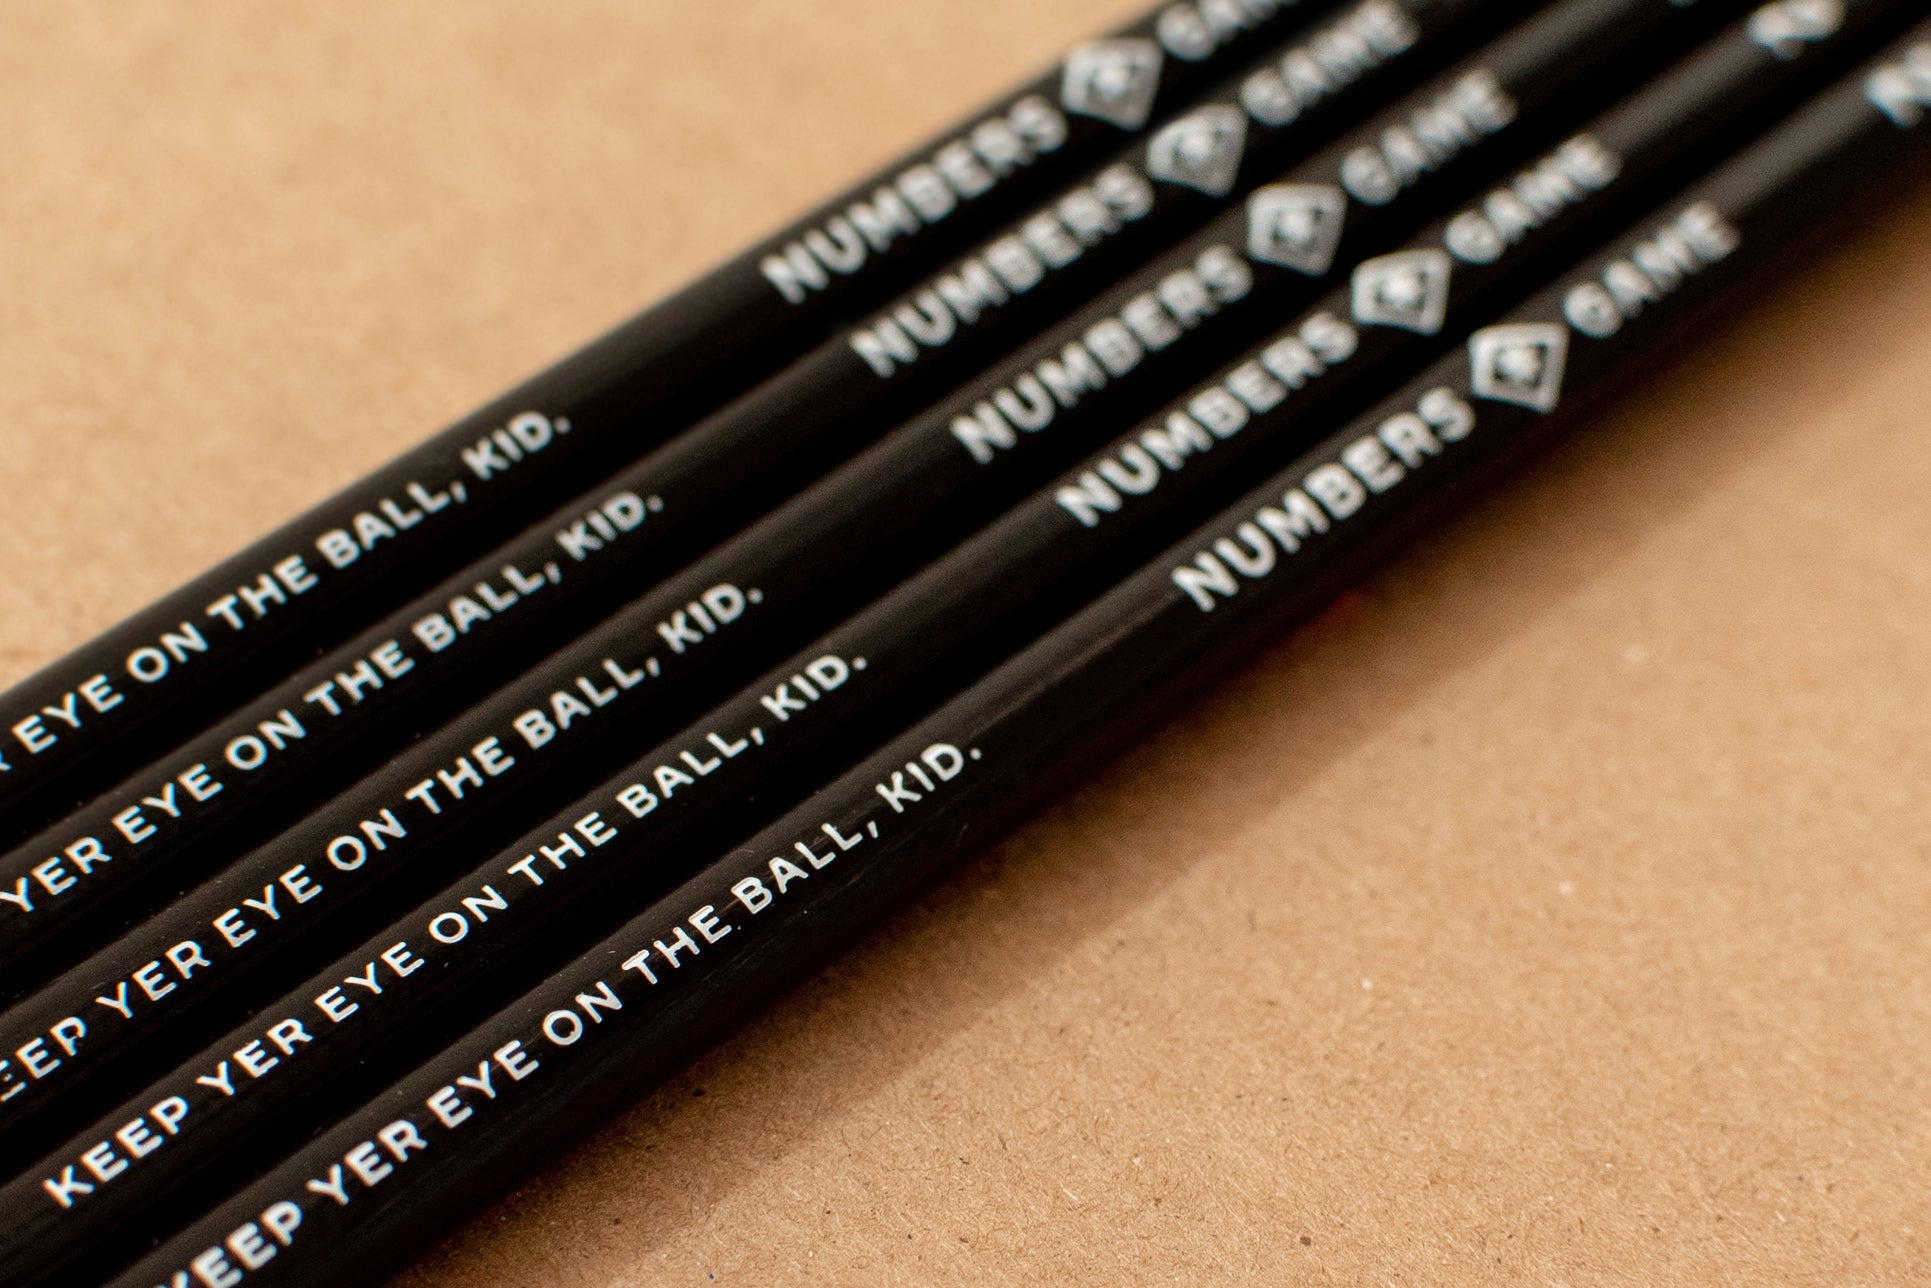 Numbers Game pencils are painted black and feature the Numbers Game brand logo and the phrase, "Keep yer eye on the ball, kid." printed in white.